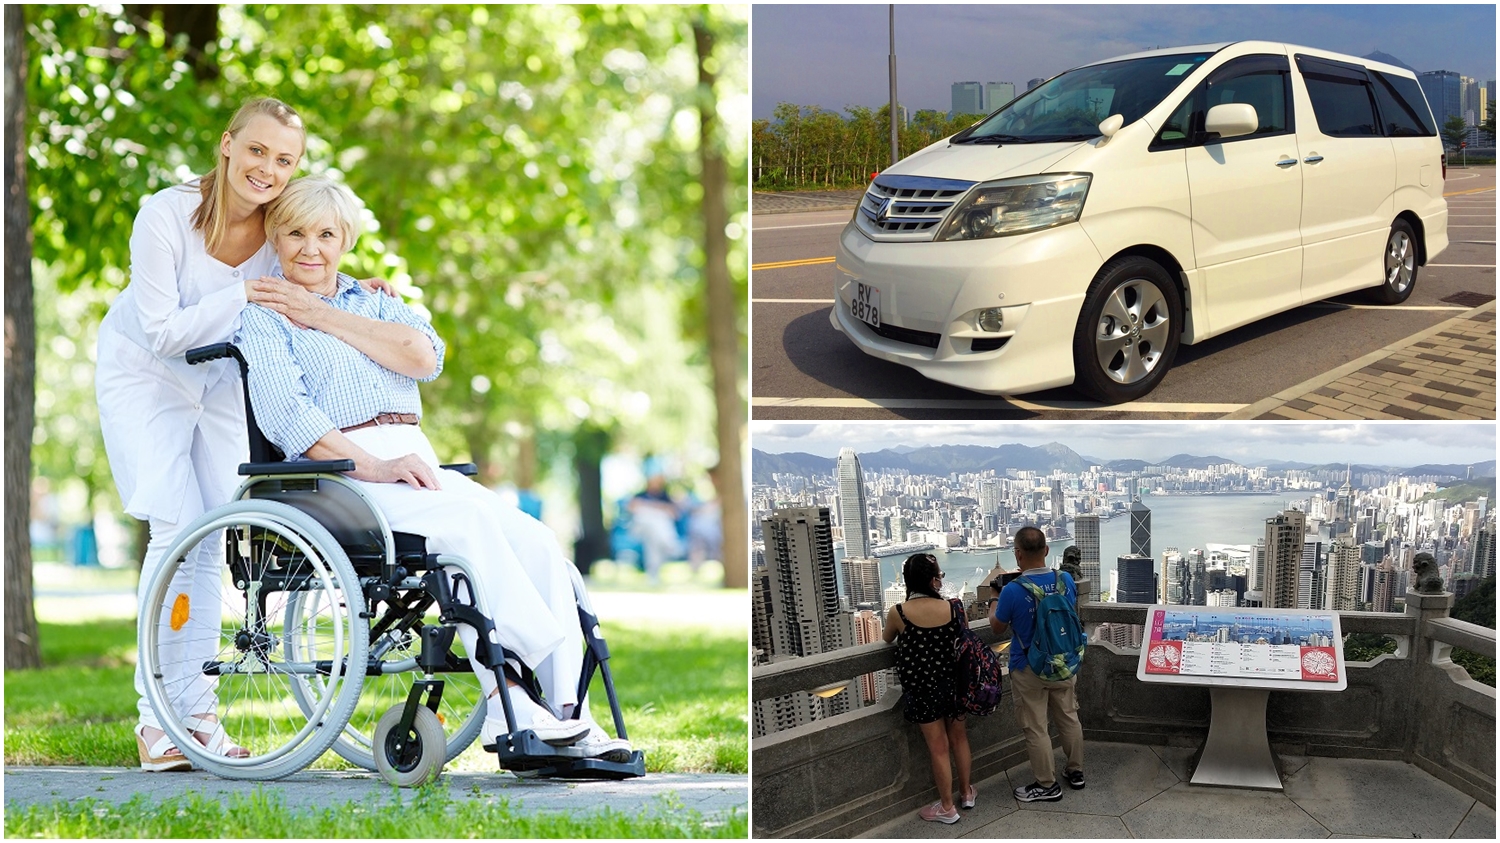 FAQ of Travelers with walking problems: Can your car for Hong Kong private tour accommodate my mobility aid? YES!